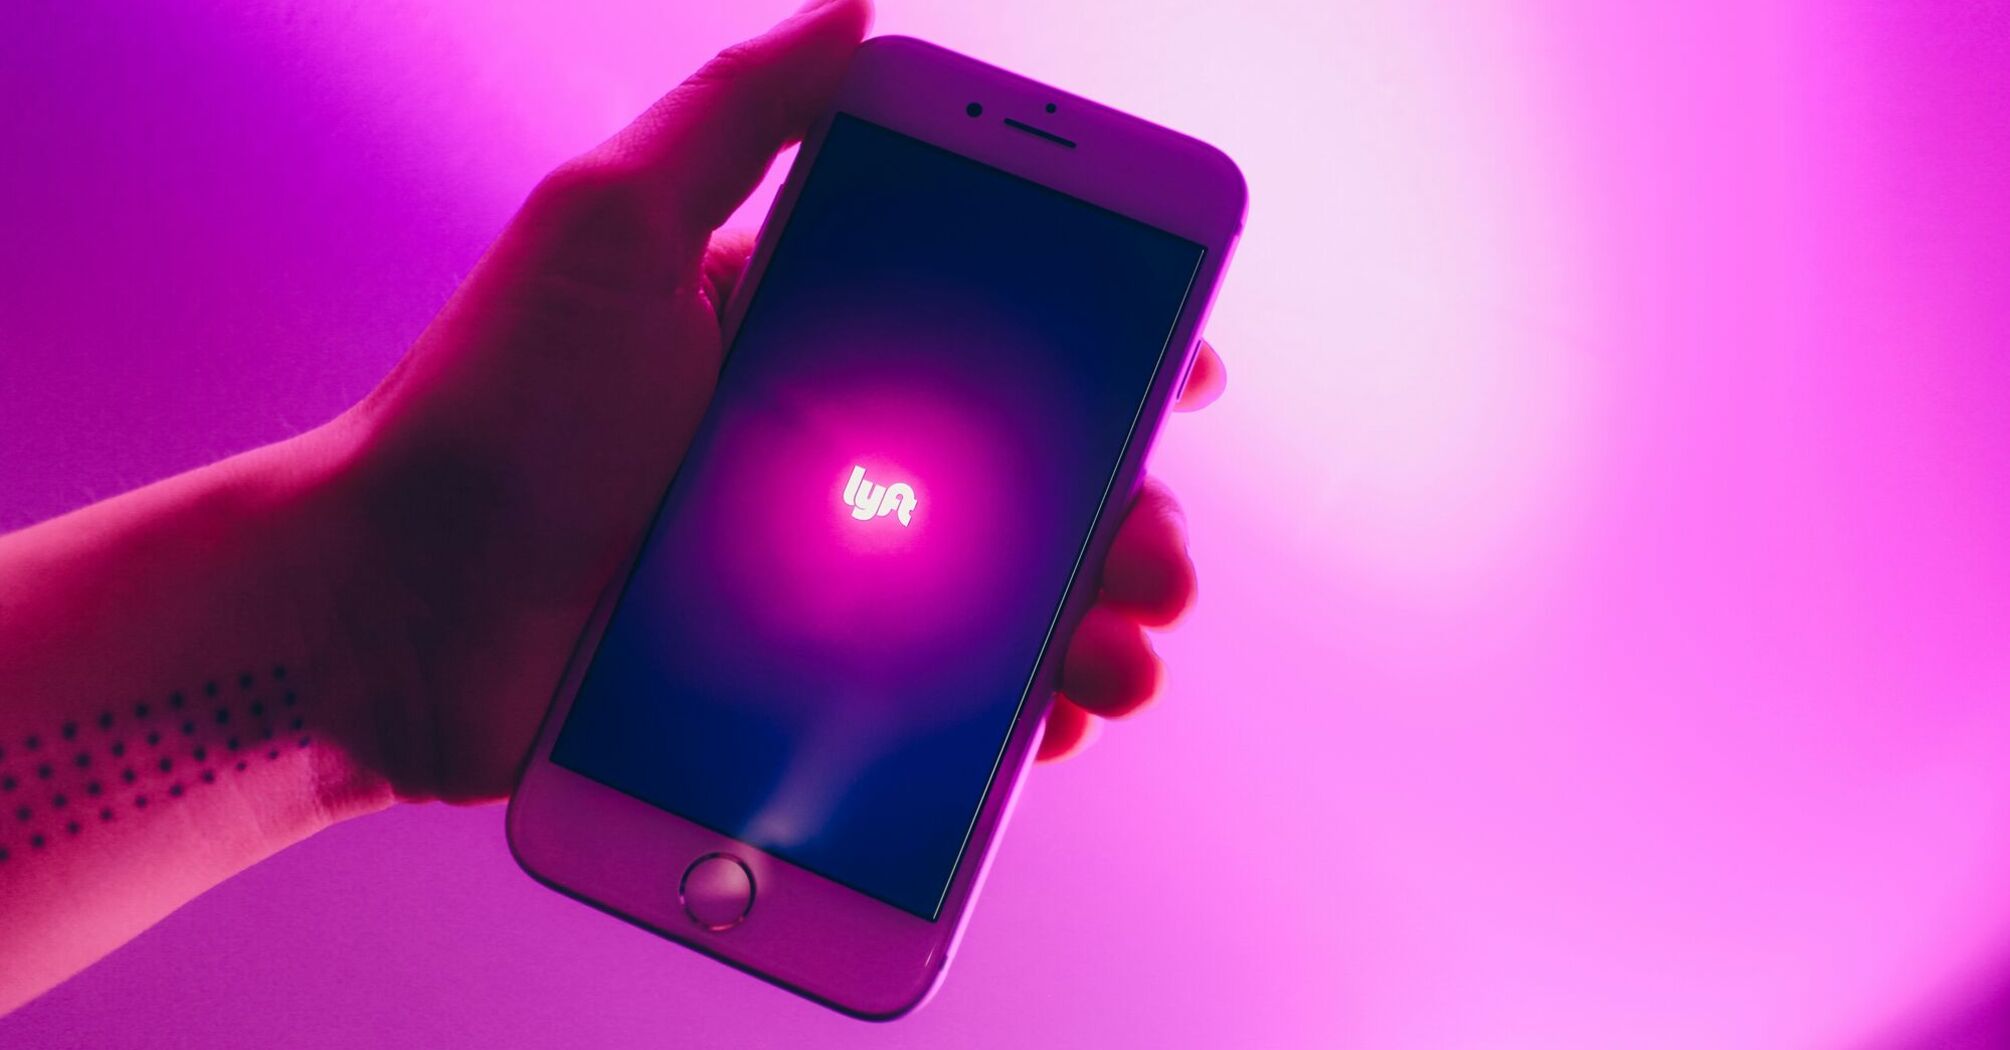 Hand holding a smartphone with the Lyft app logo illuminated on the screen, set against a vibrant pink backdrop